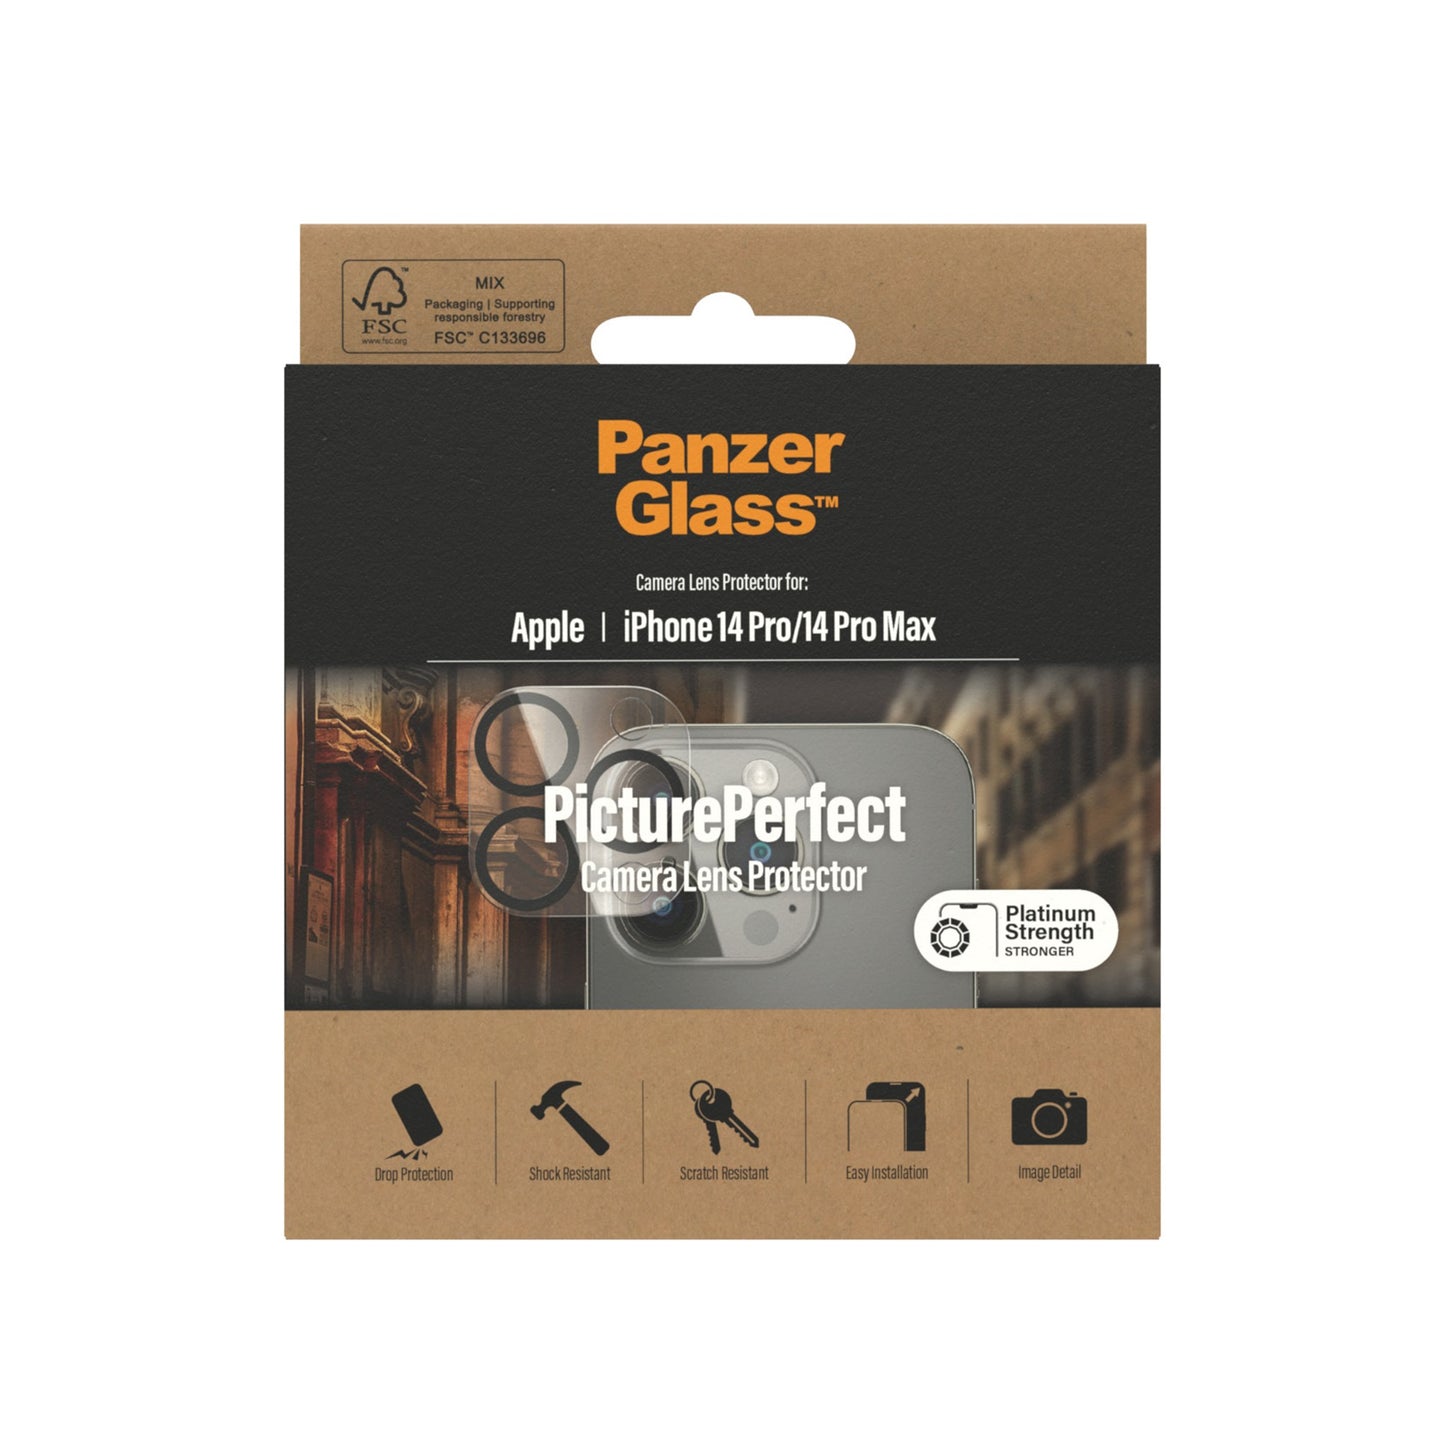 PanzerGlass™ PicturePerfect Camera Lens Protector Apple iPhone 14 Pro | 14 Pro Max 3